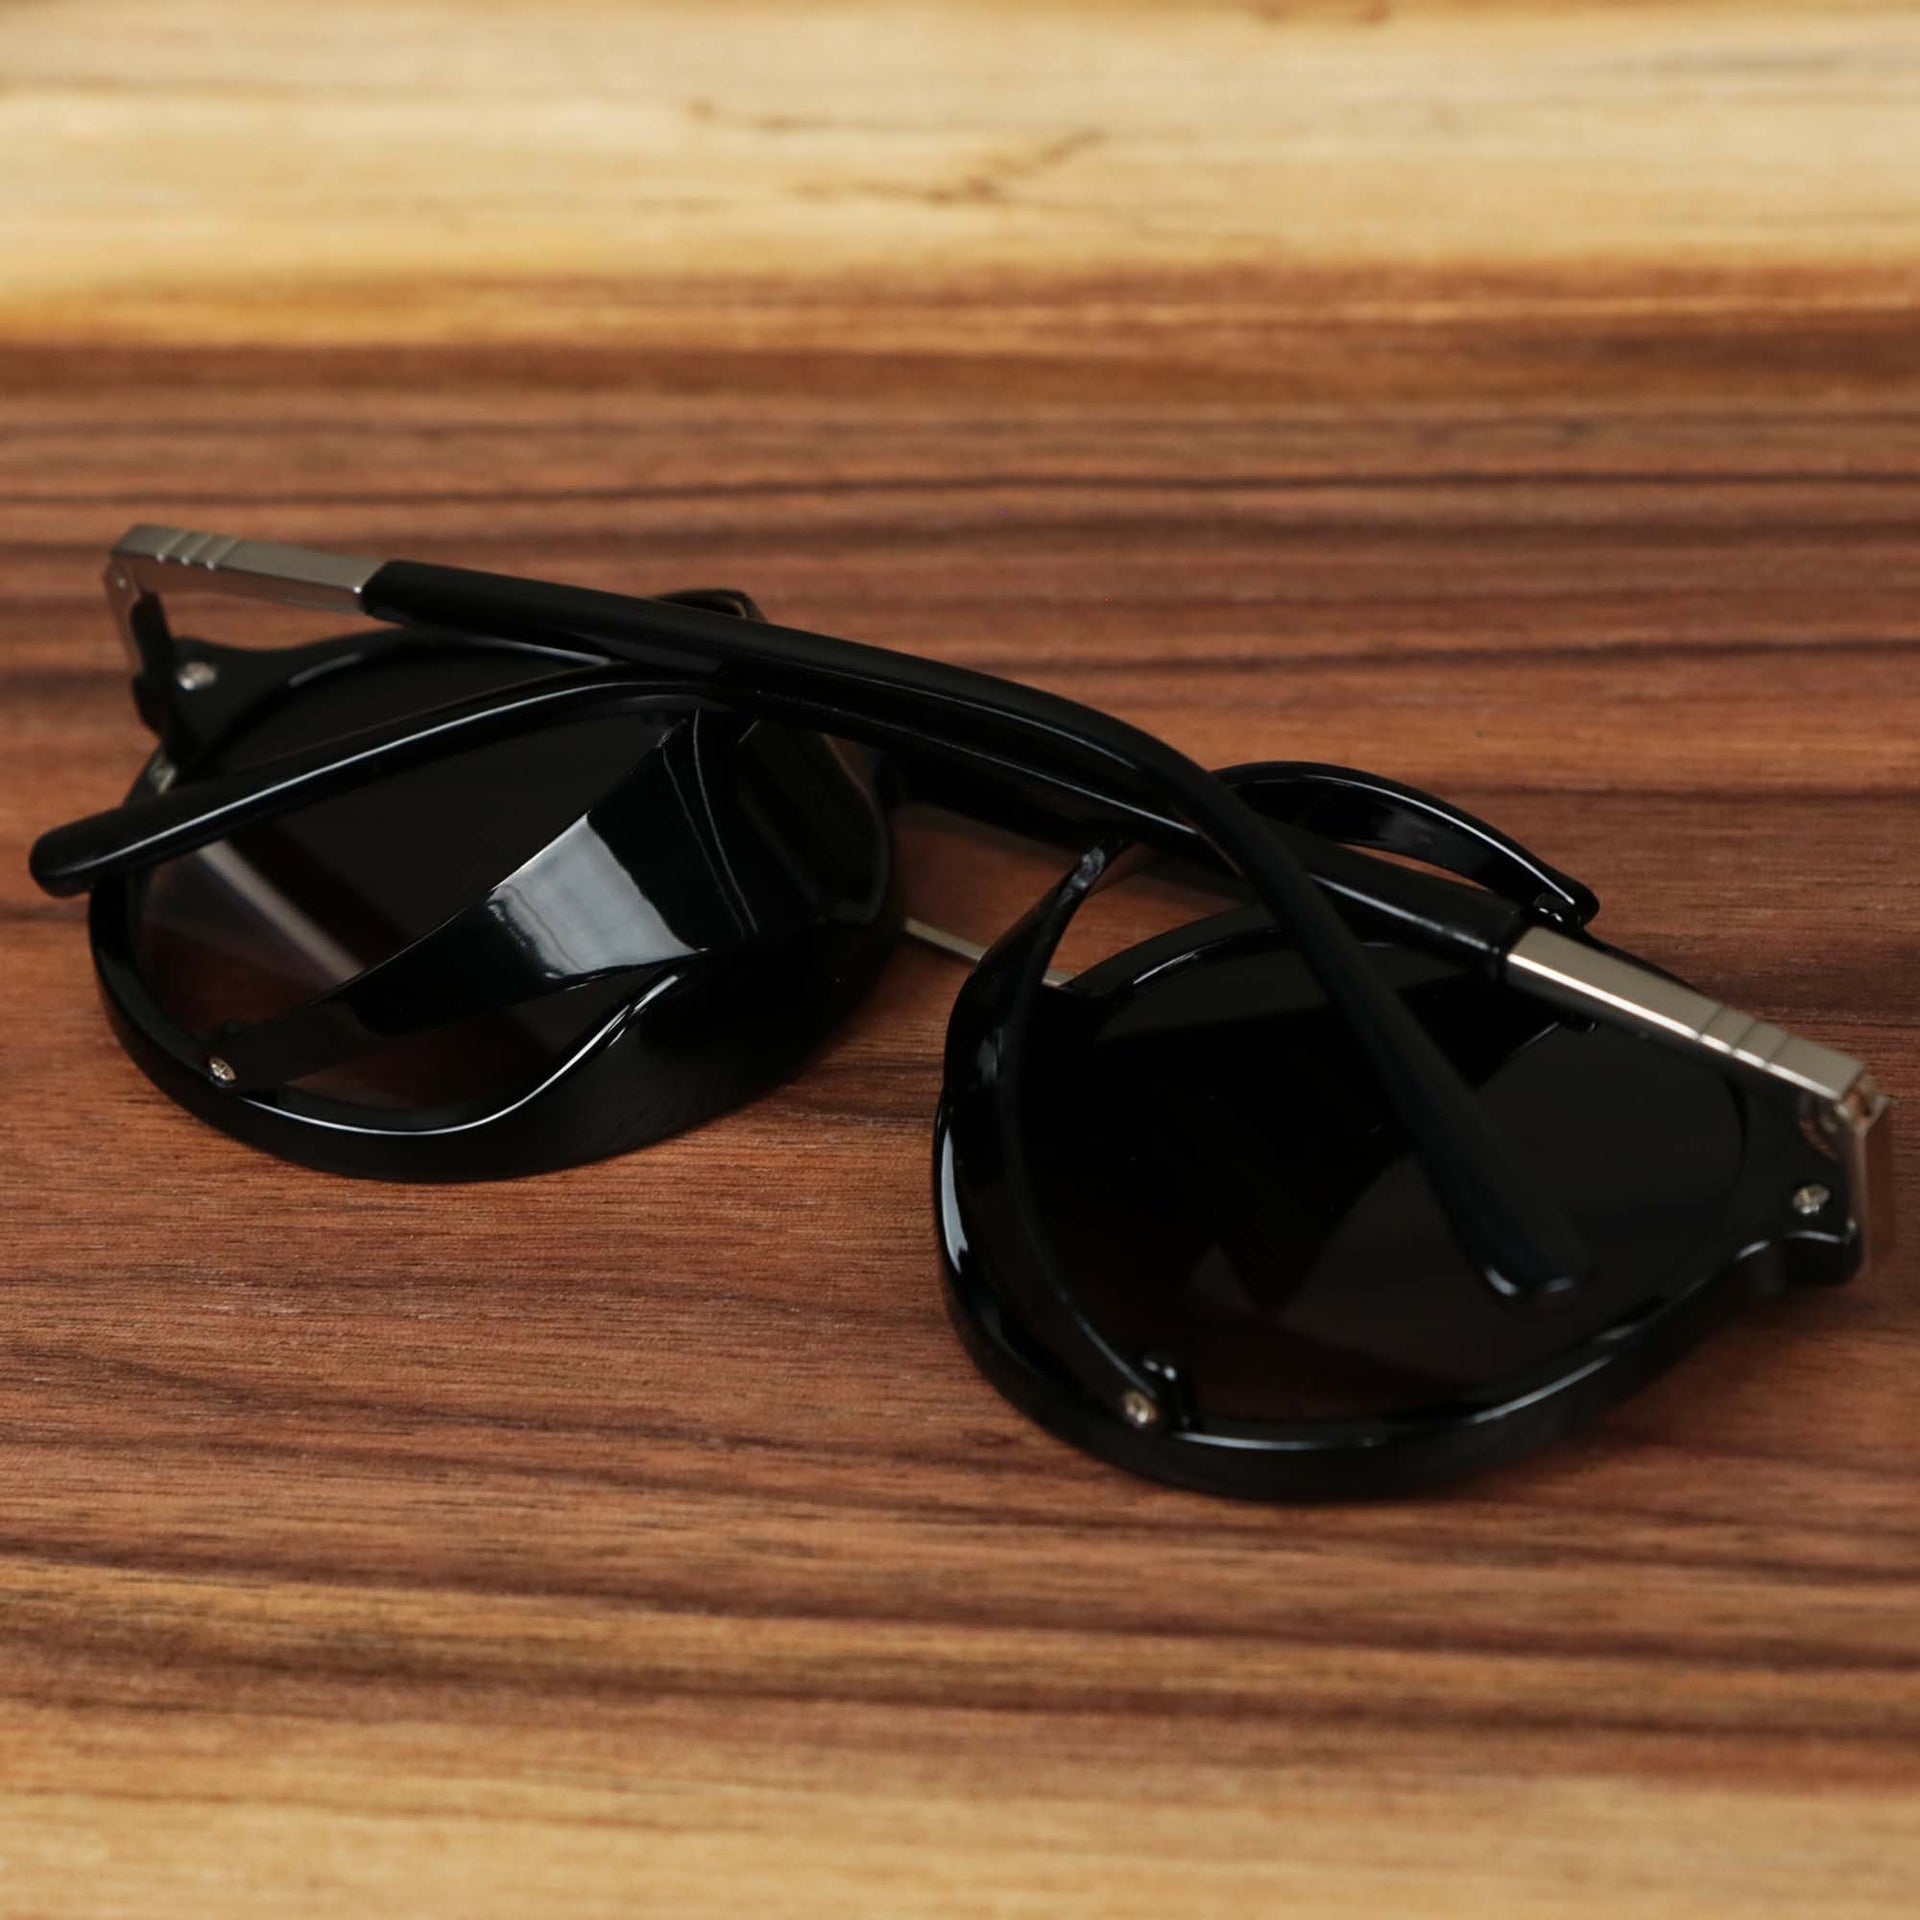 The Steampunk Frames Black Lens Sunglasses with Black Glossy Frame folded up